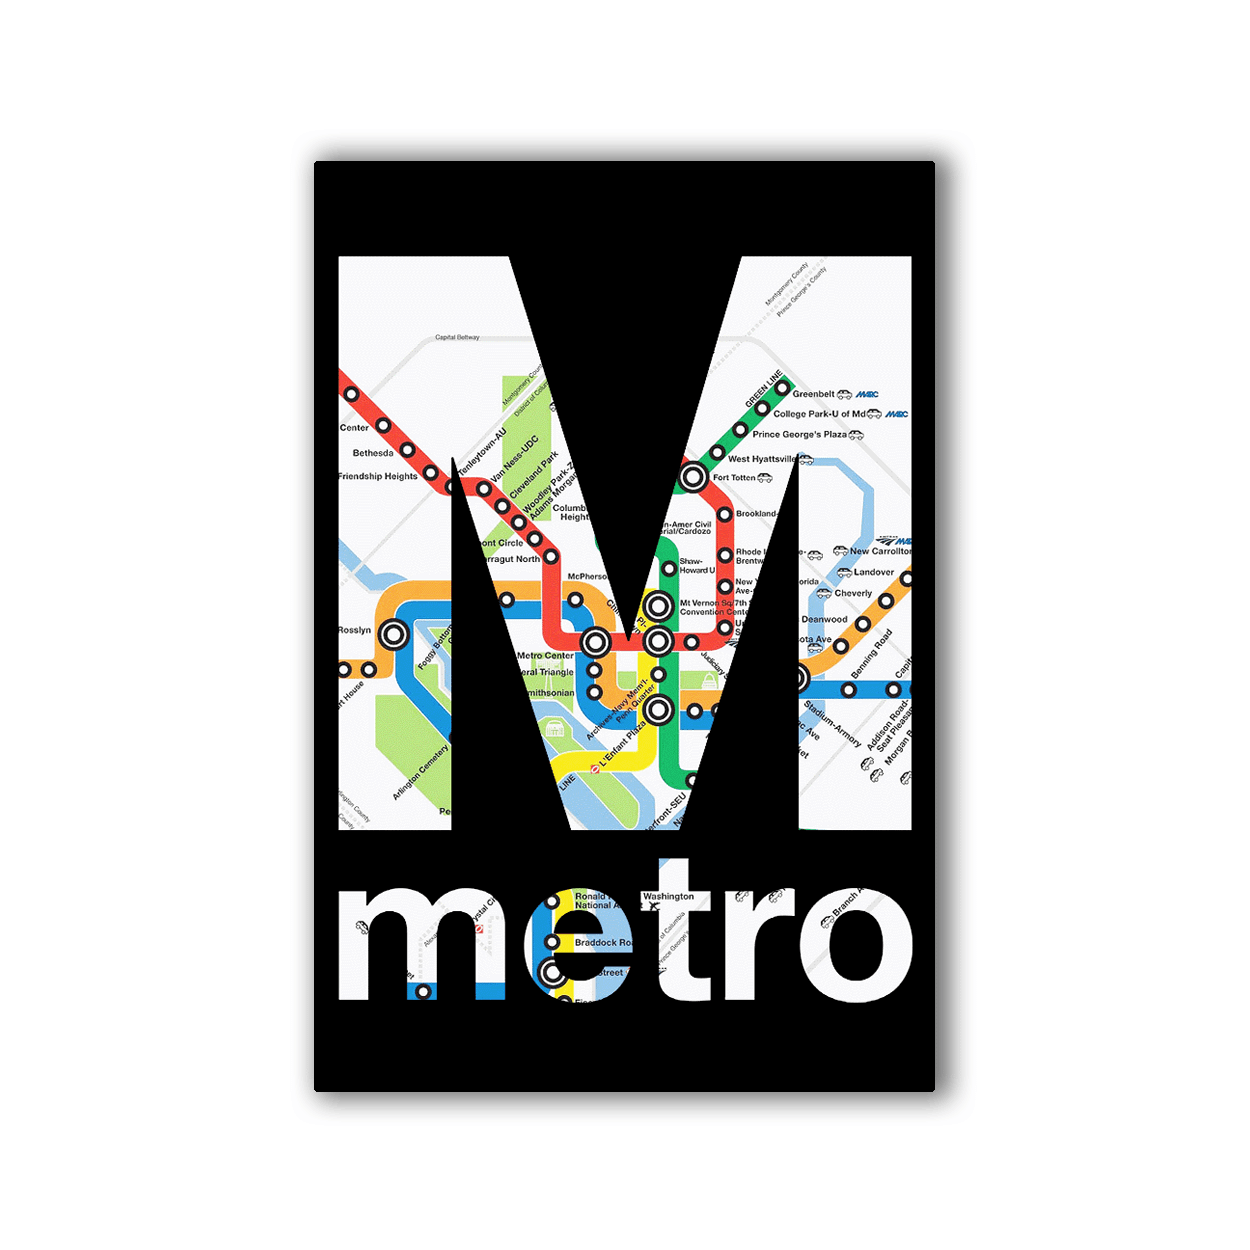 2x3 colorful magnet with image of D.C. Metro